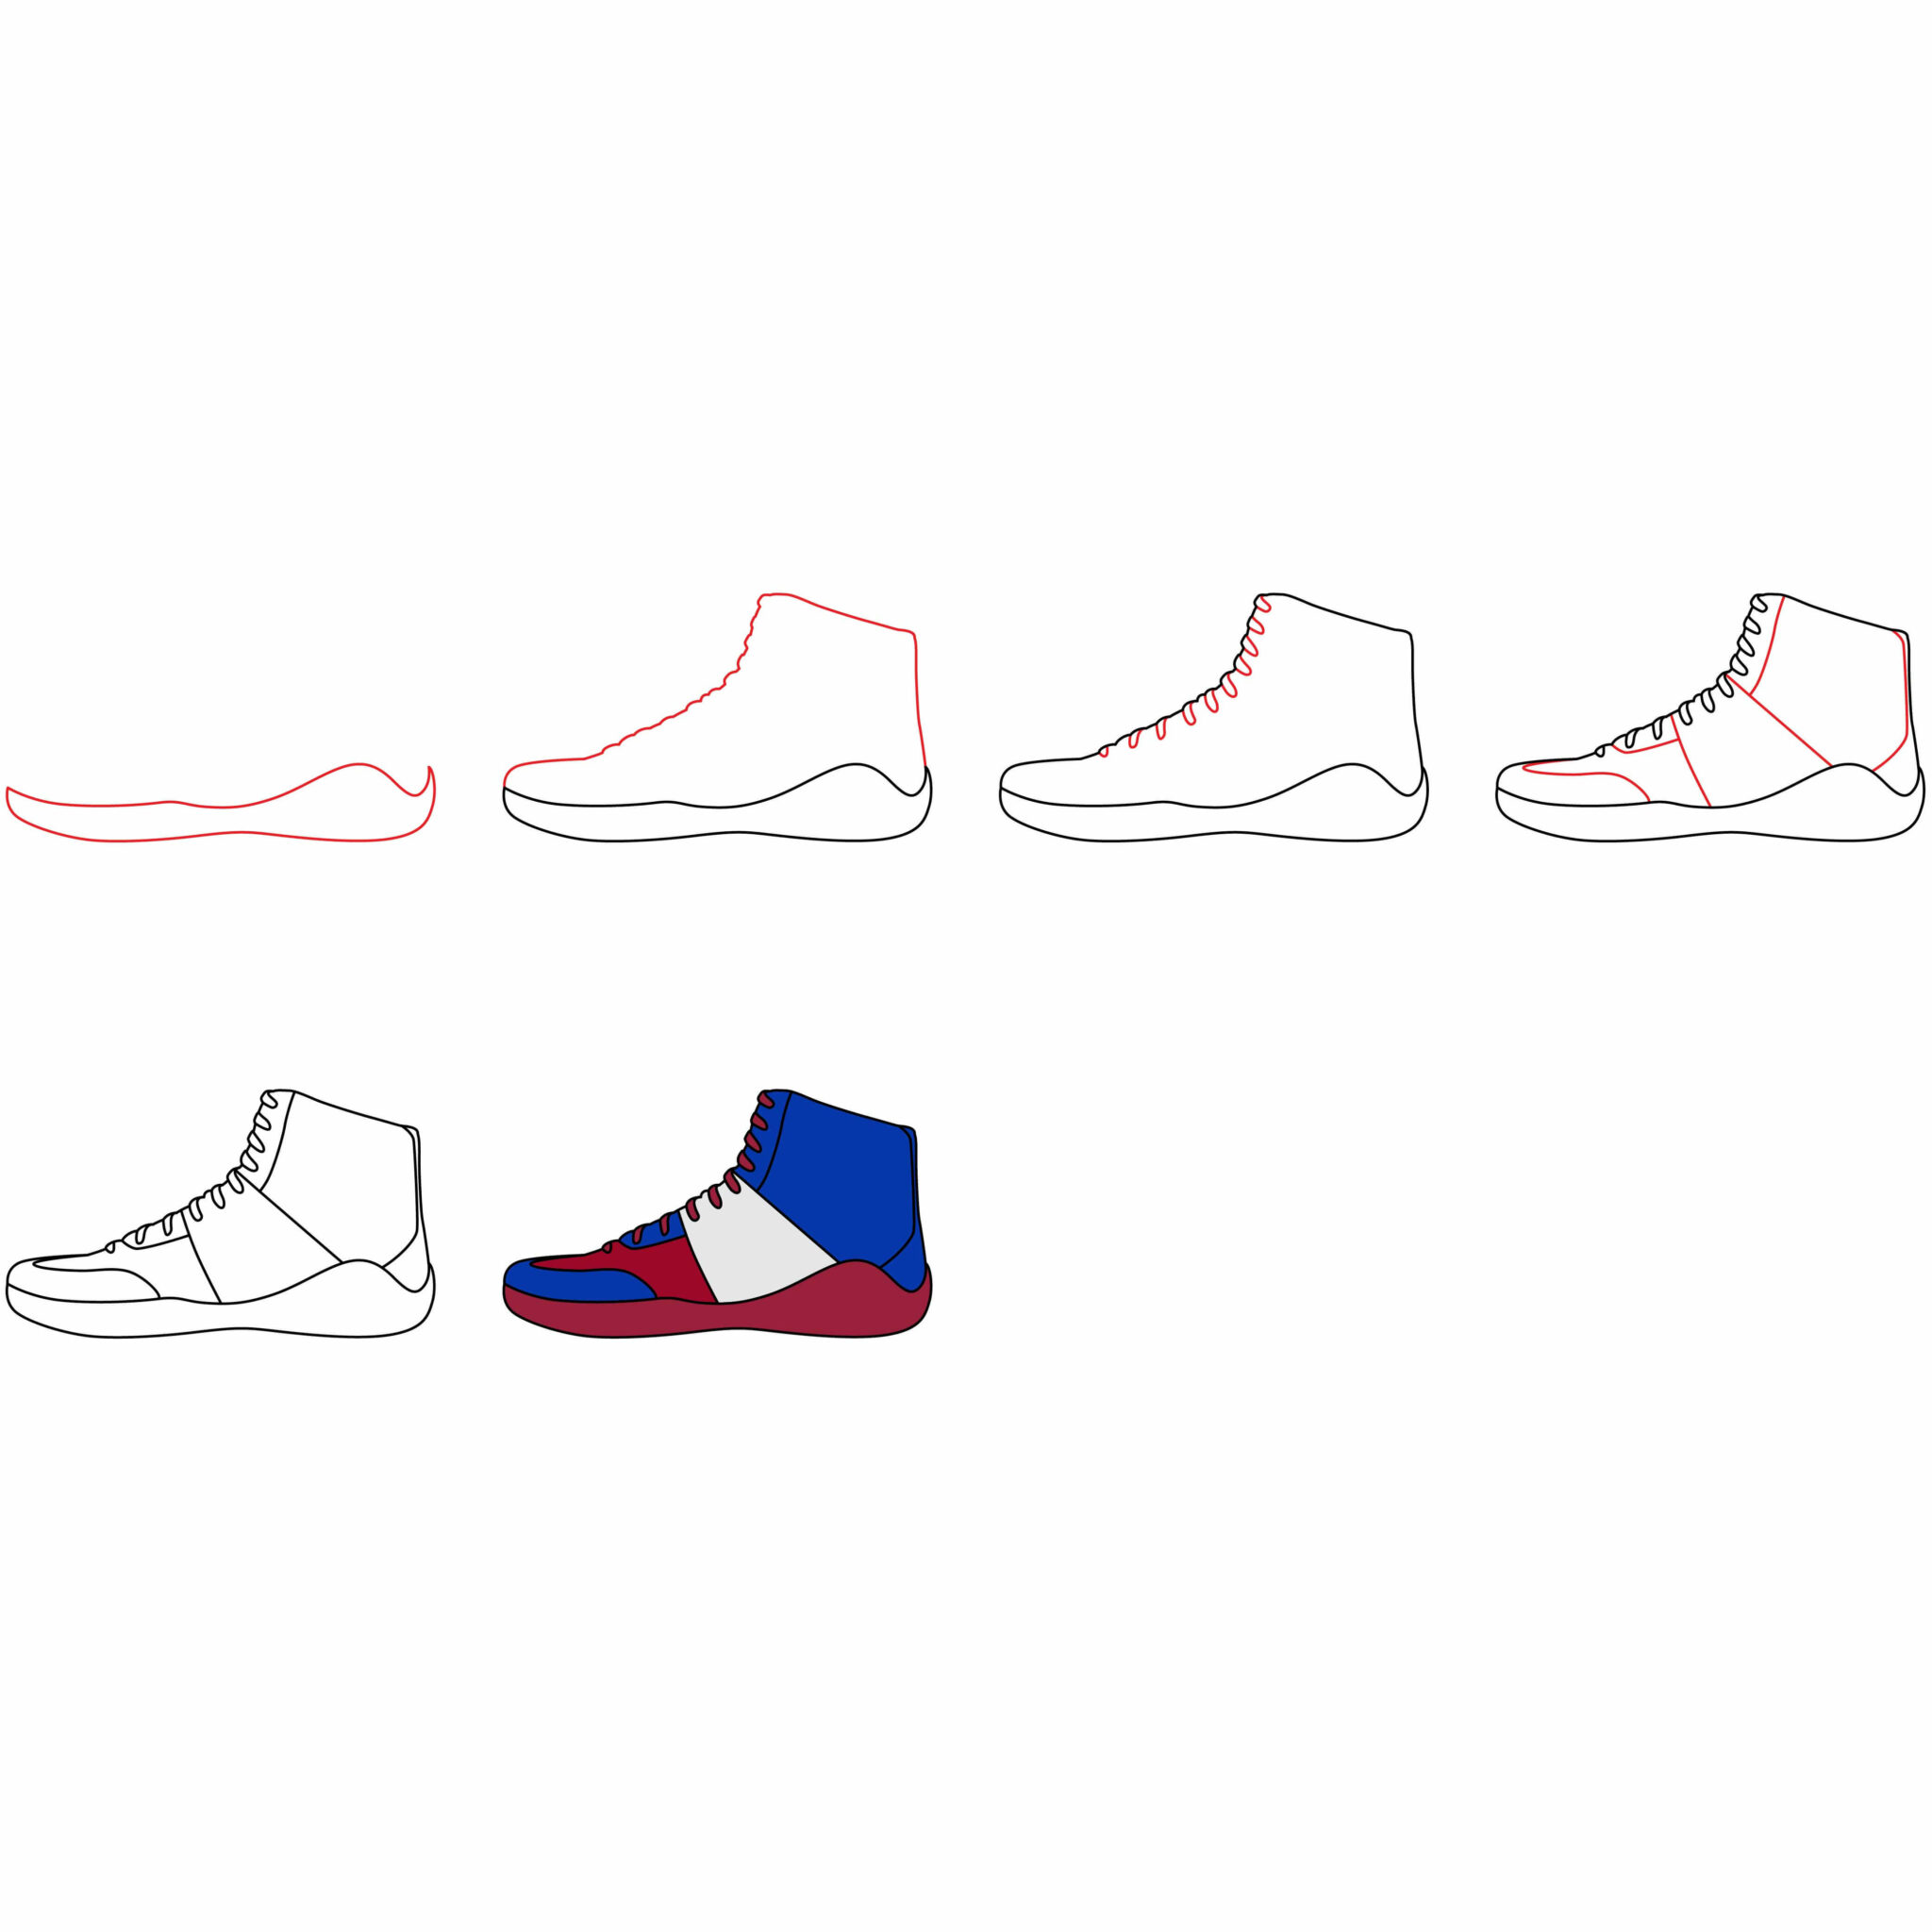 How To Draw A Wrestling Shoe A Straightforward Guide